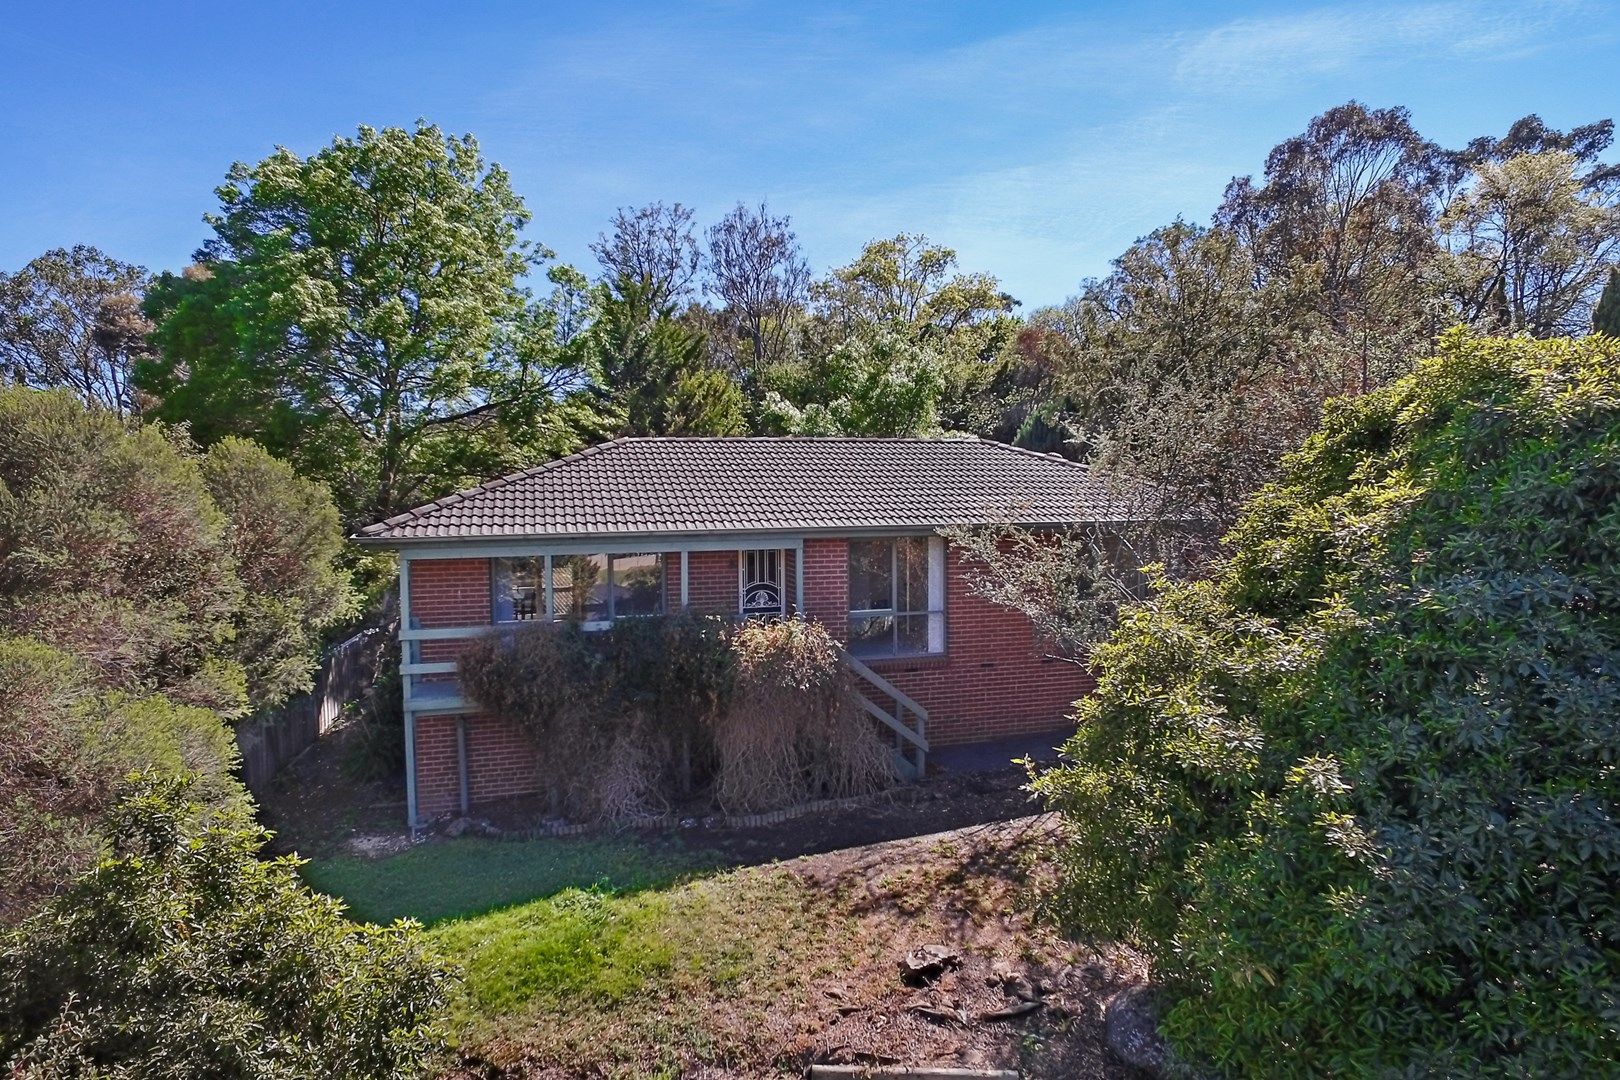 19 - 21 Goodall Drive, Lilydale VIC 3140, Image 0